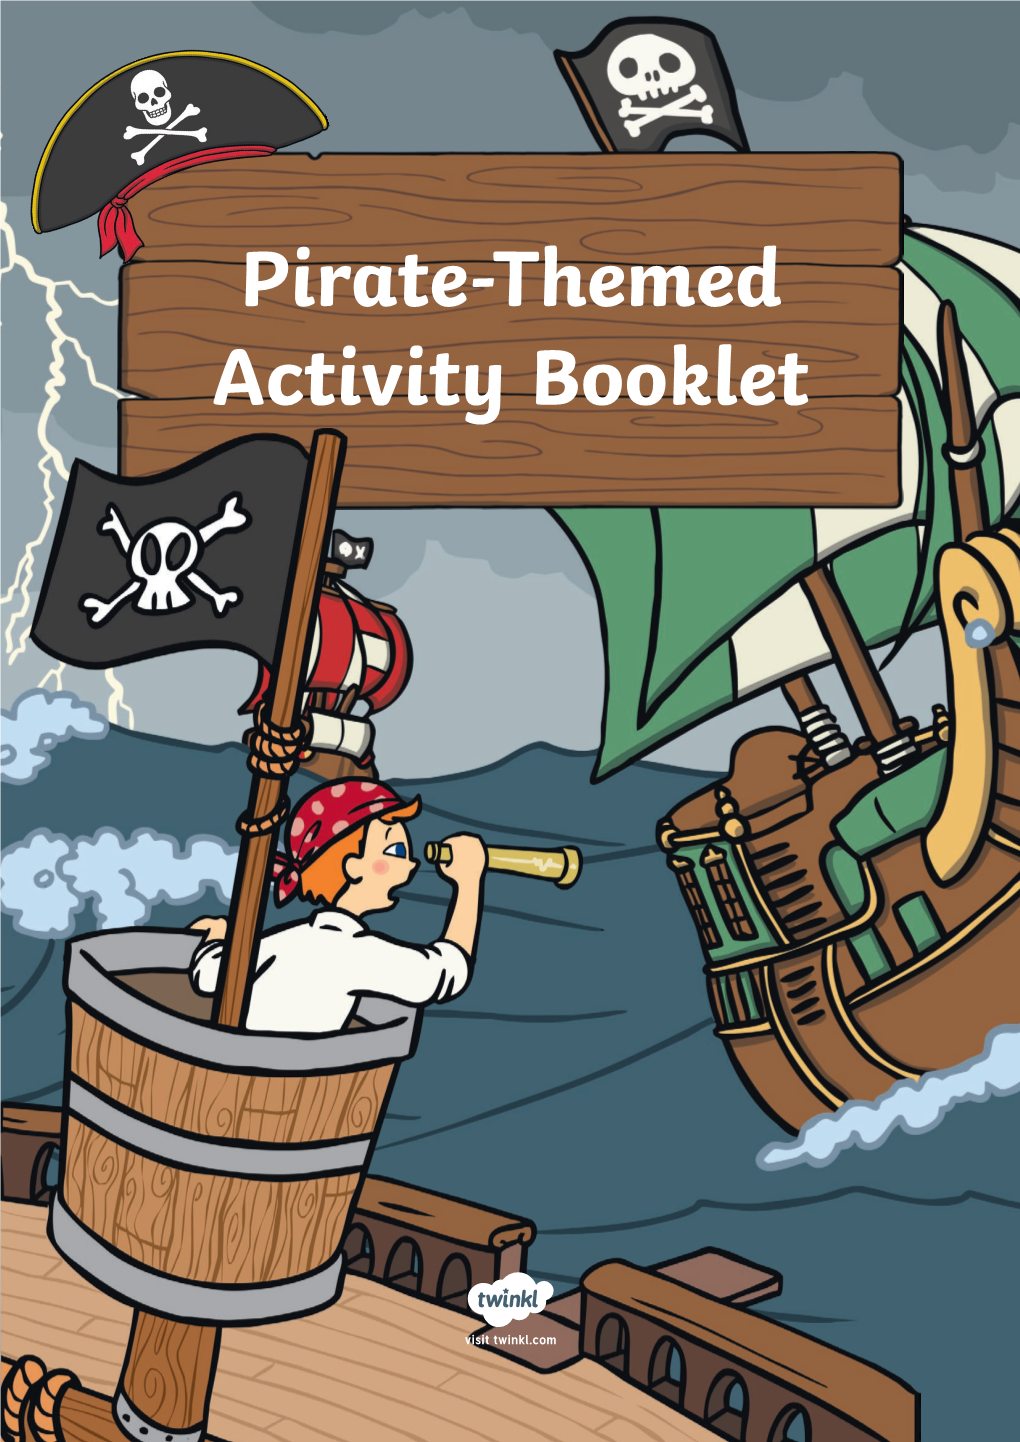 Pirate-Themed Activity Booklet